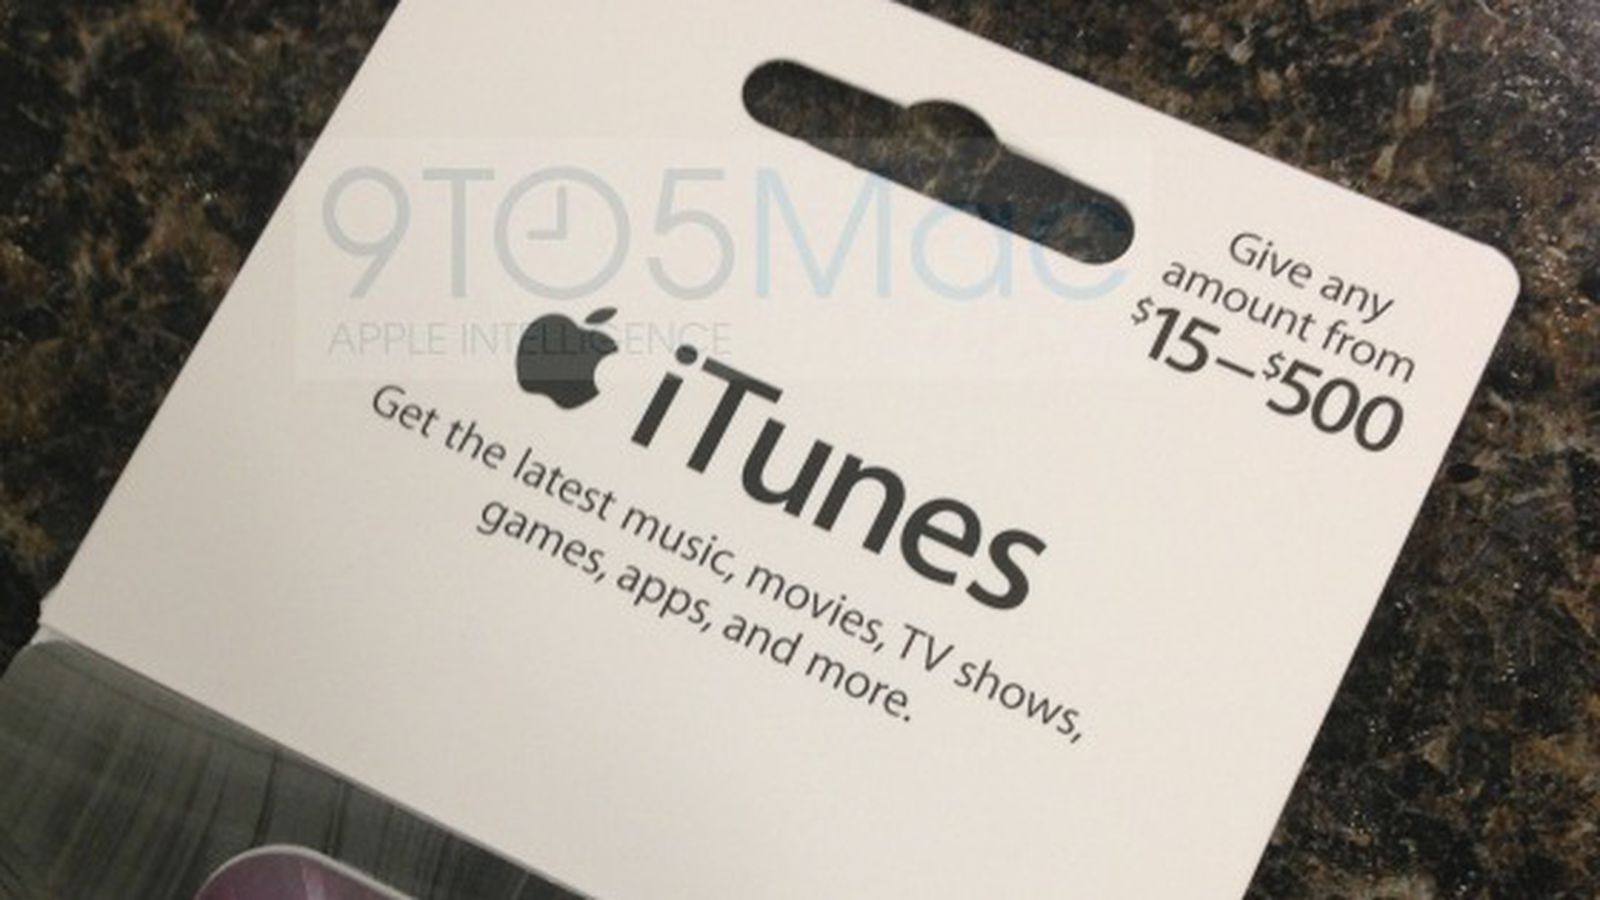 itunes gift card 15